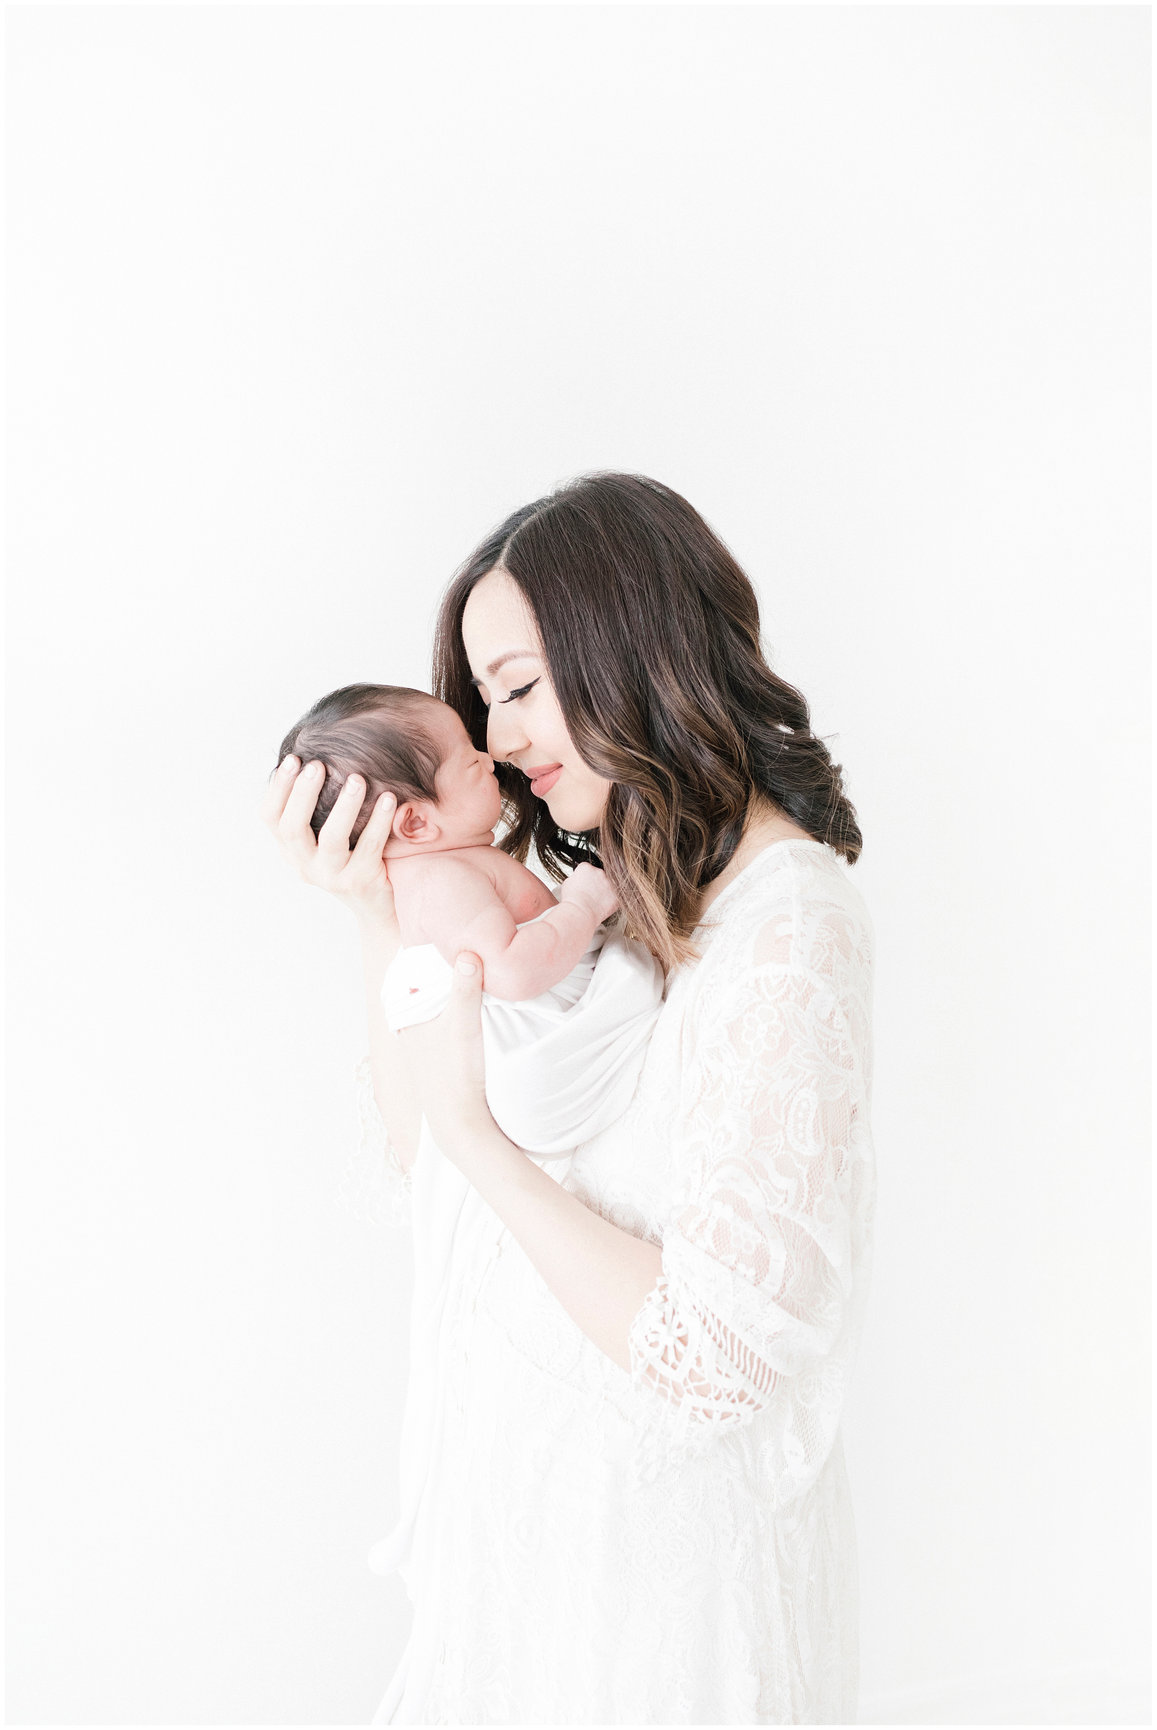 Studio Maternity Sessions and Why I Love Them